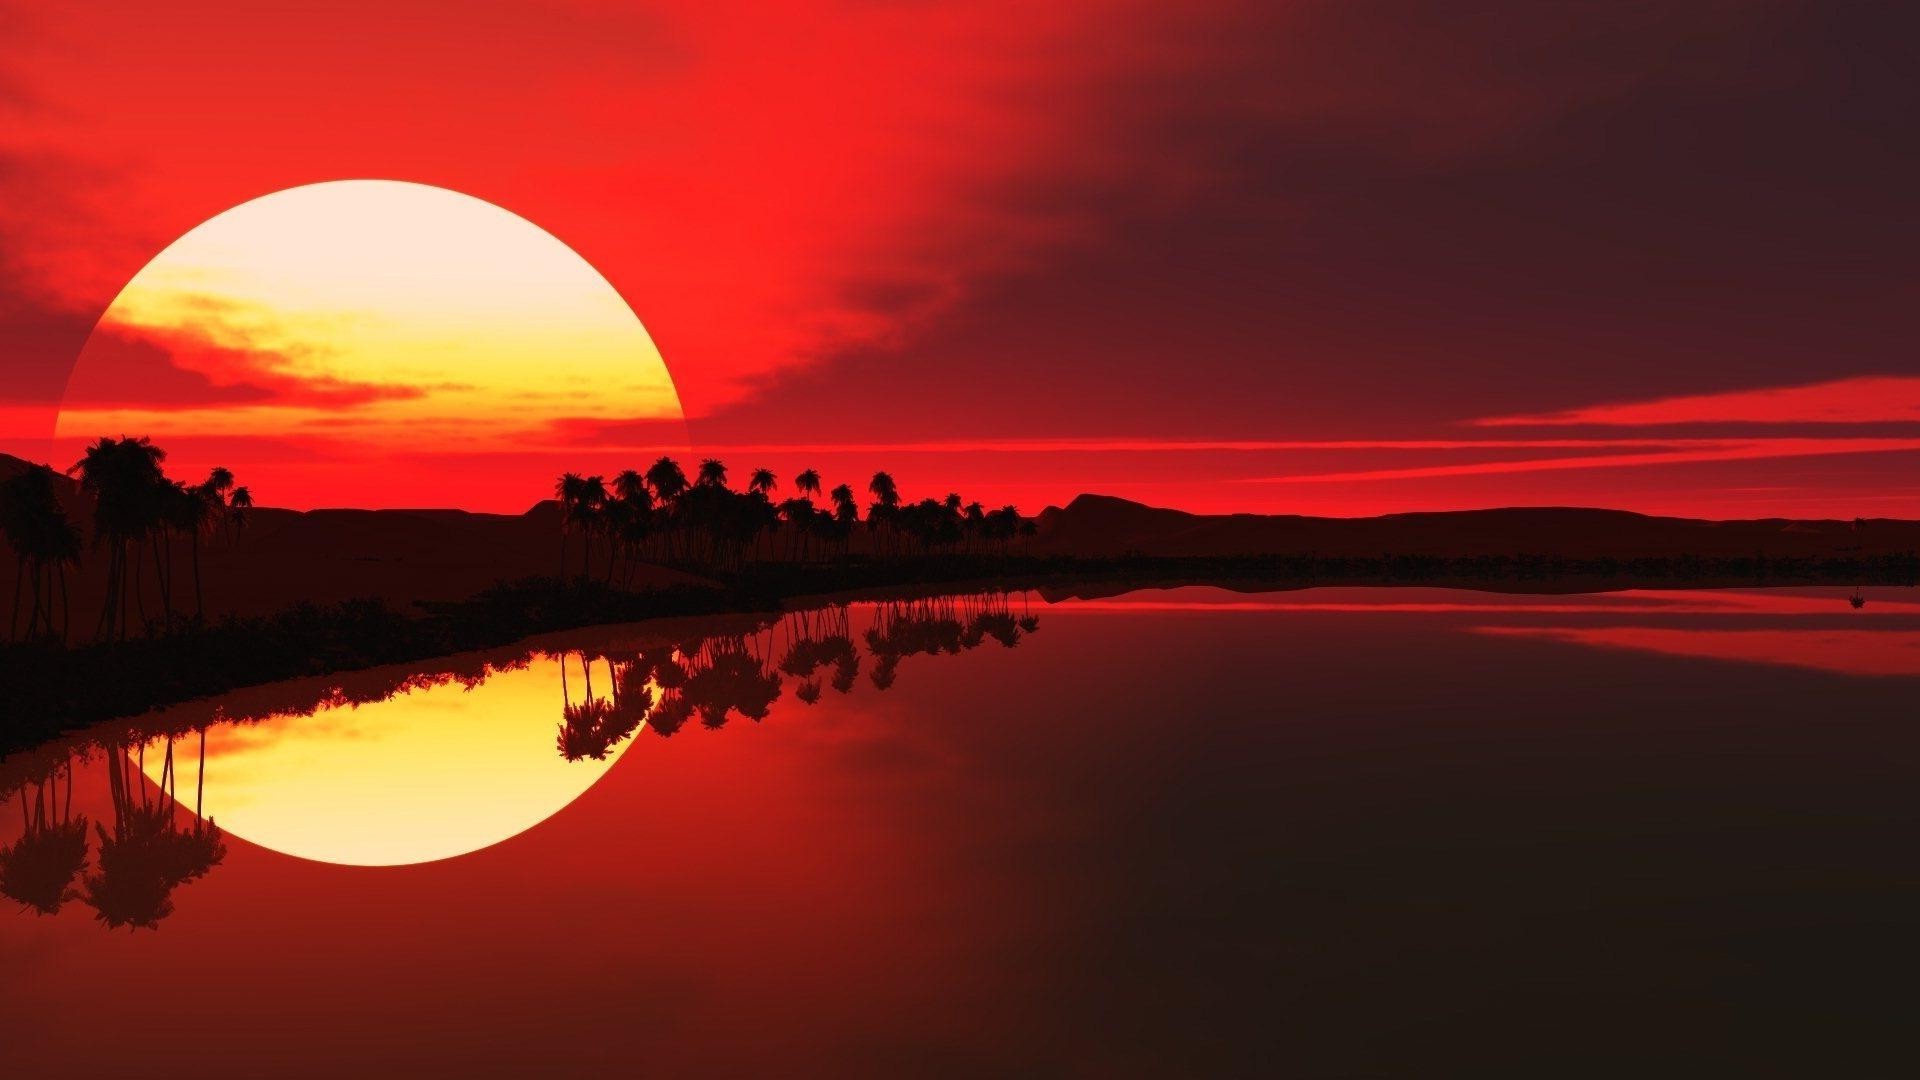 the sunset and sunrise sunset dawn evening sun dusk sky water silhouette nature landscape reflection